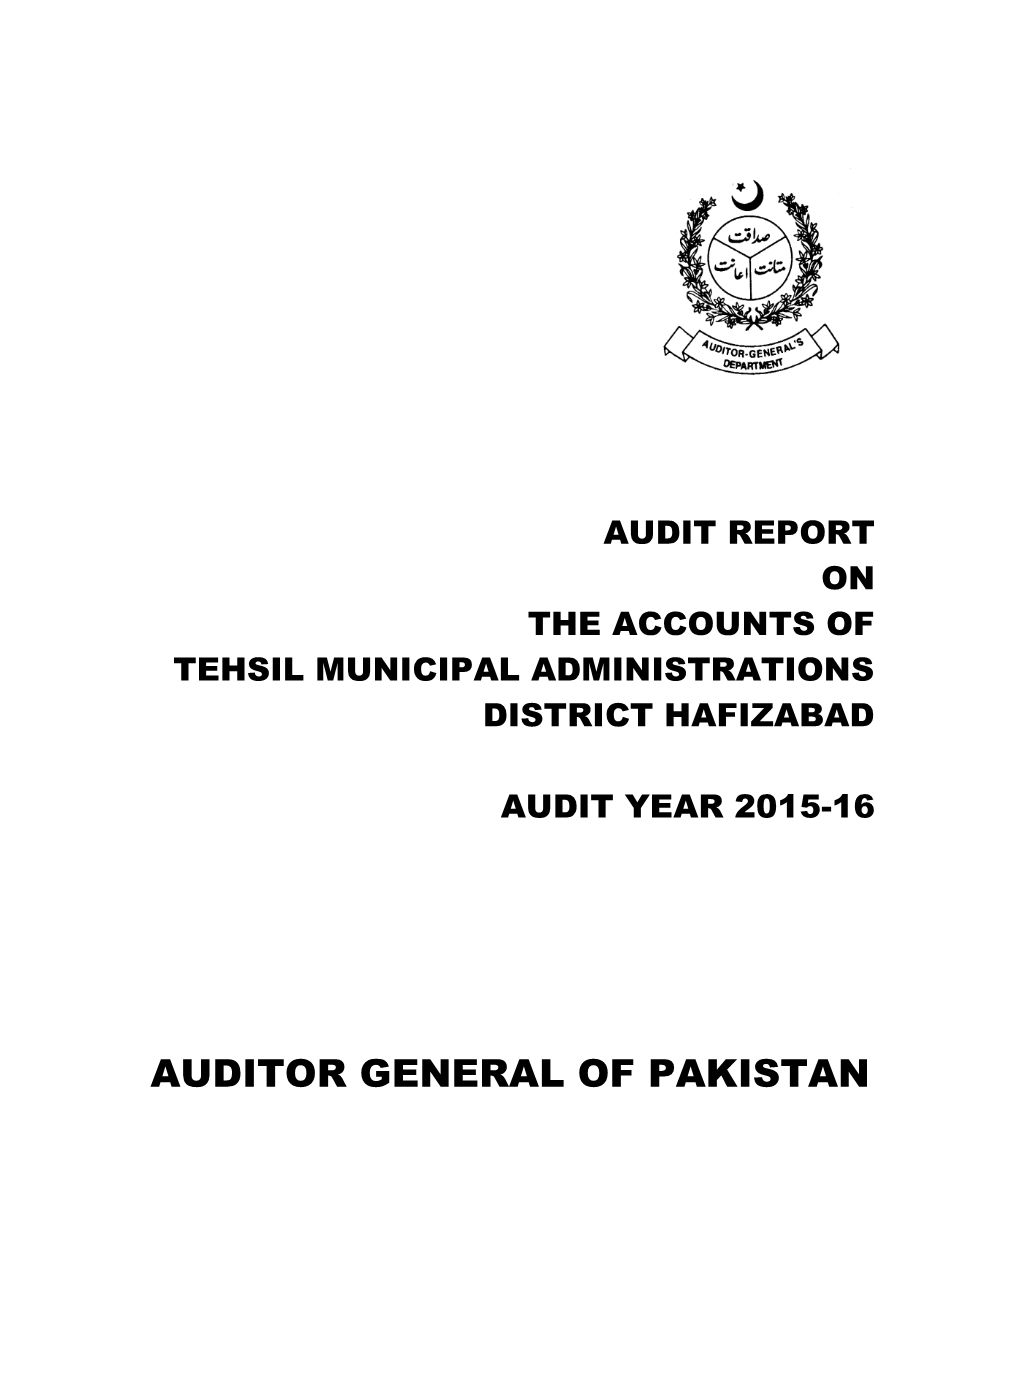 Audit Report on the Accounts of Tehsil Municipal Administrations District Hafizabad Audit Year 2015-16